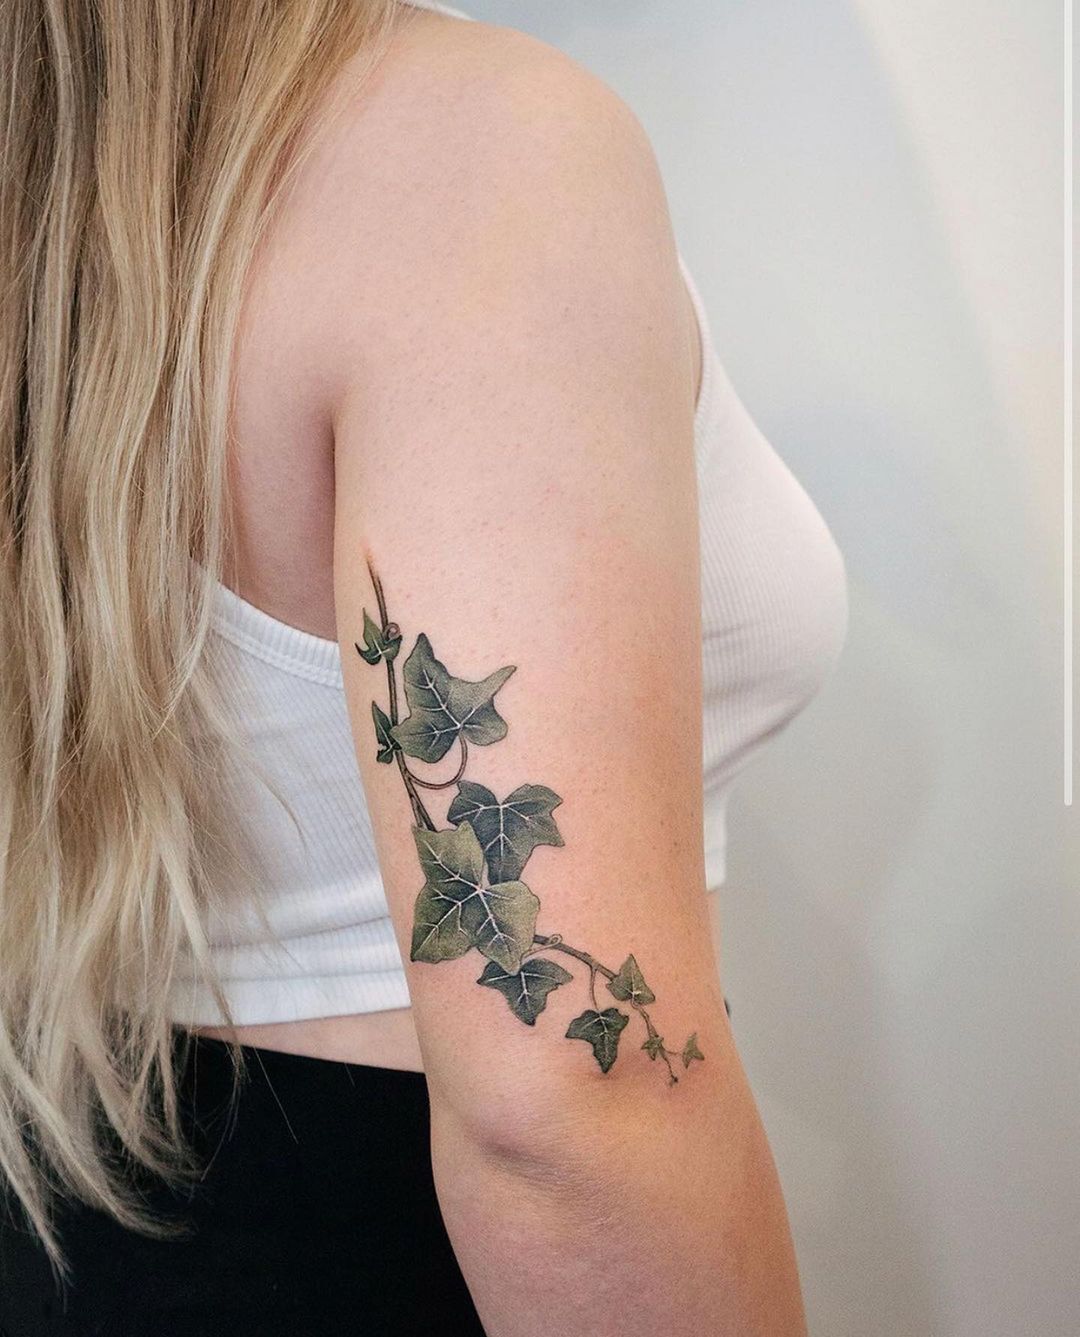 Ivy and Vine Tattoos and Tattoo Designs